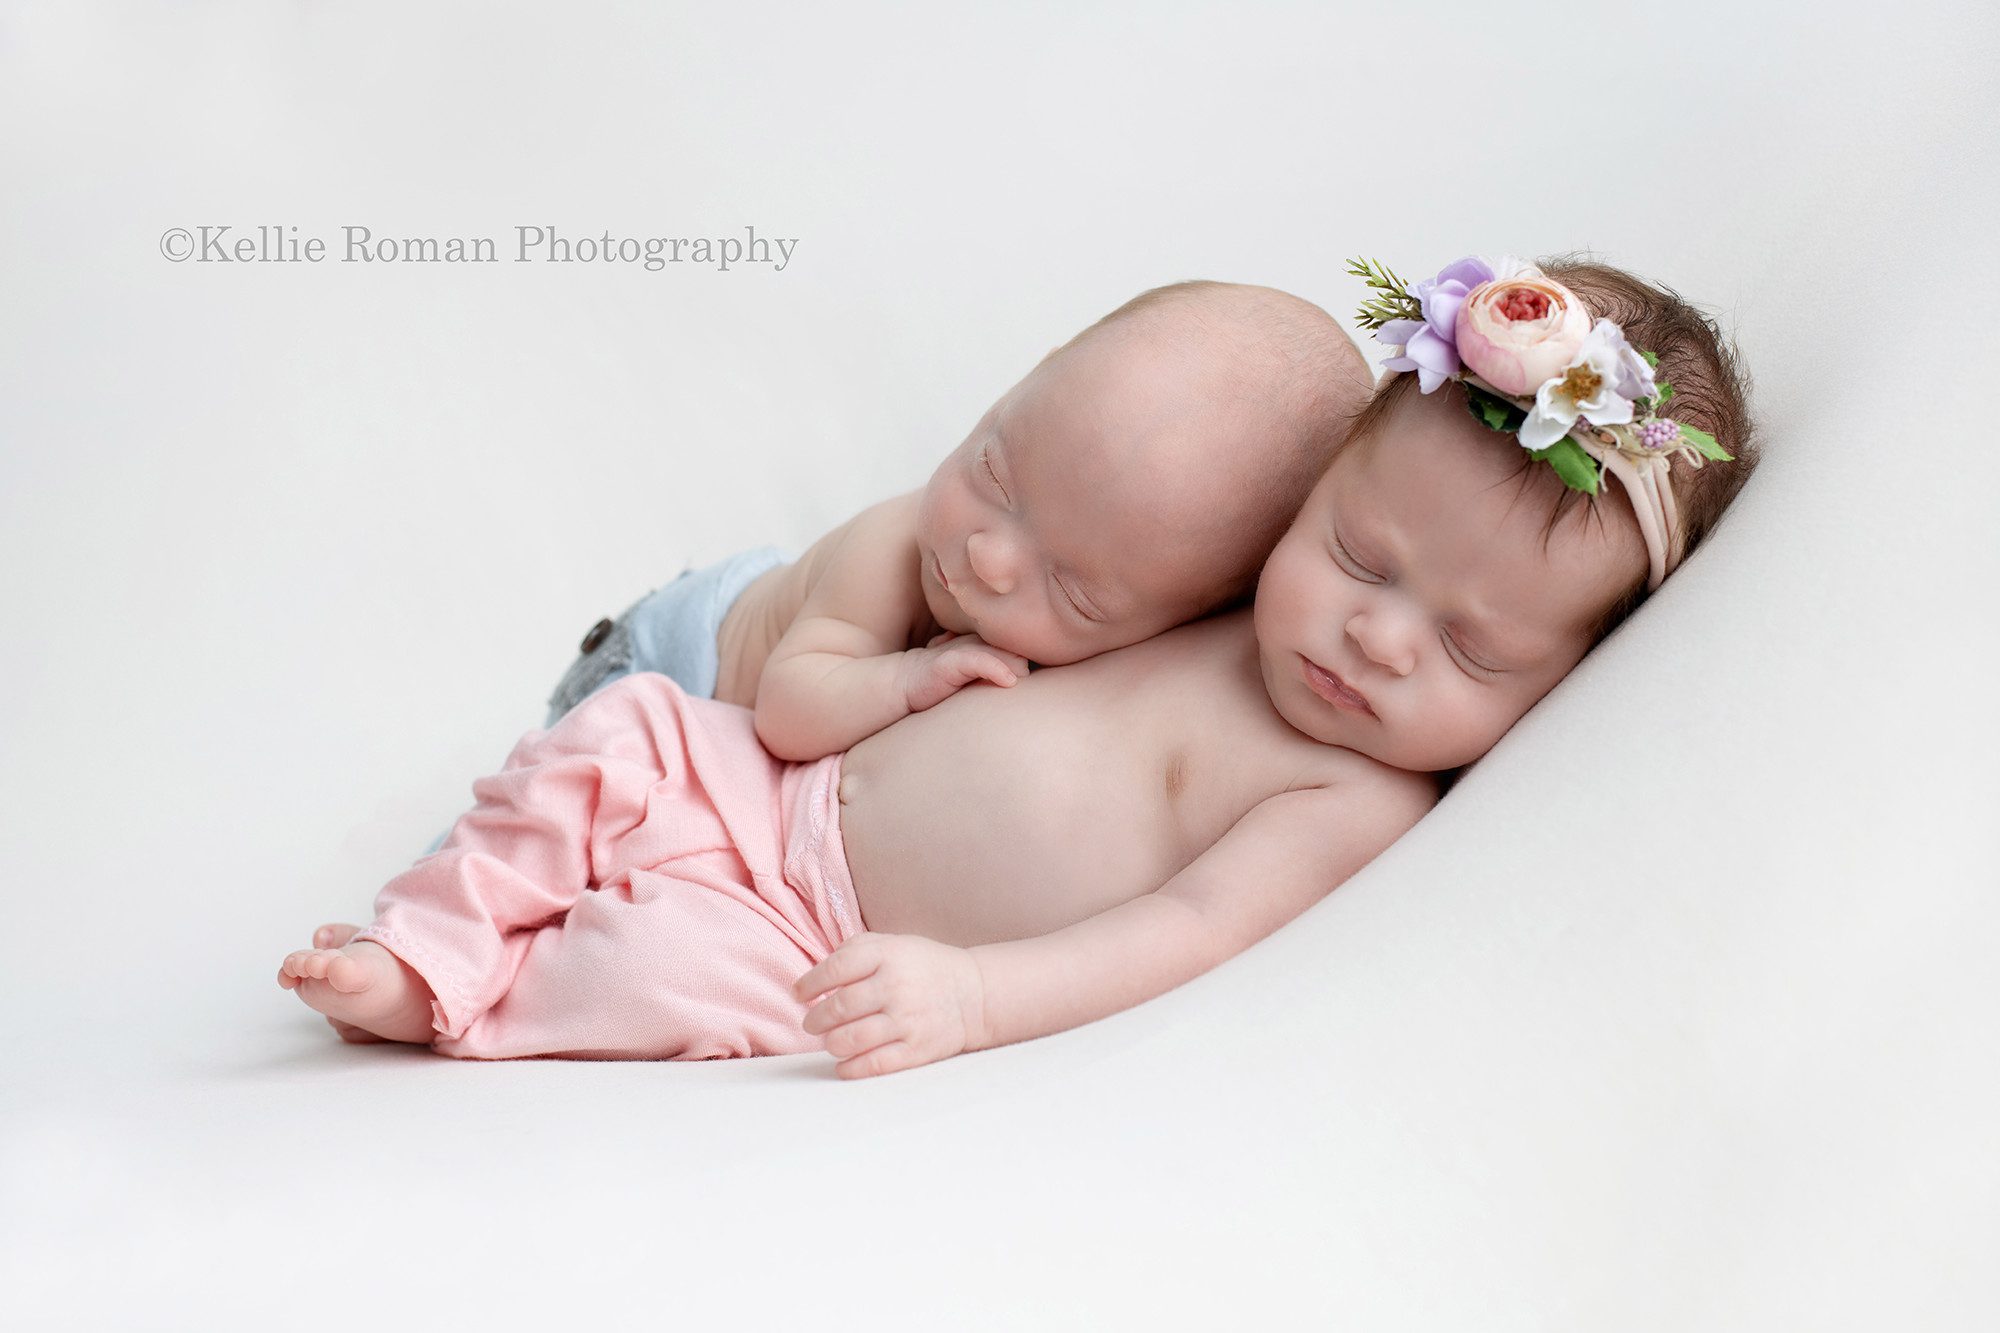 milwaukee twins a newborn brother and sister in milwaukee studio for photography the girl has on light pink pants with a floral pink headband and the boy is wearing light blue pants they are posed on top of a cream colored blanket on a beanbag the girl is on the bottom on her back and the boy is on his belly posed on top of the girls torso